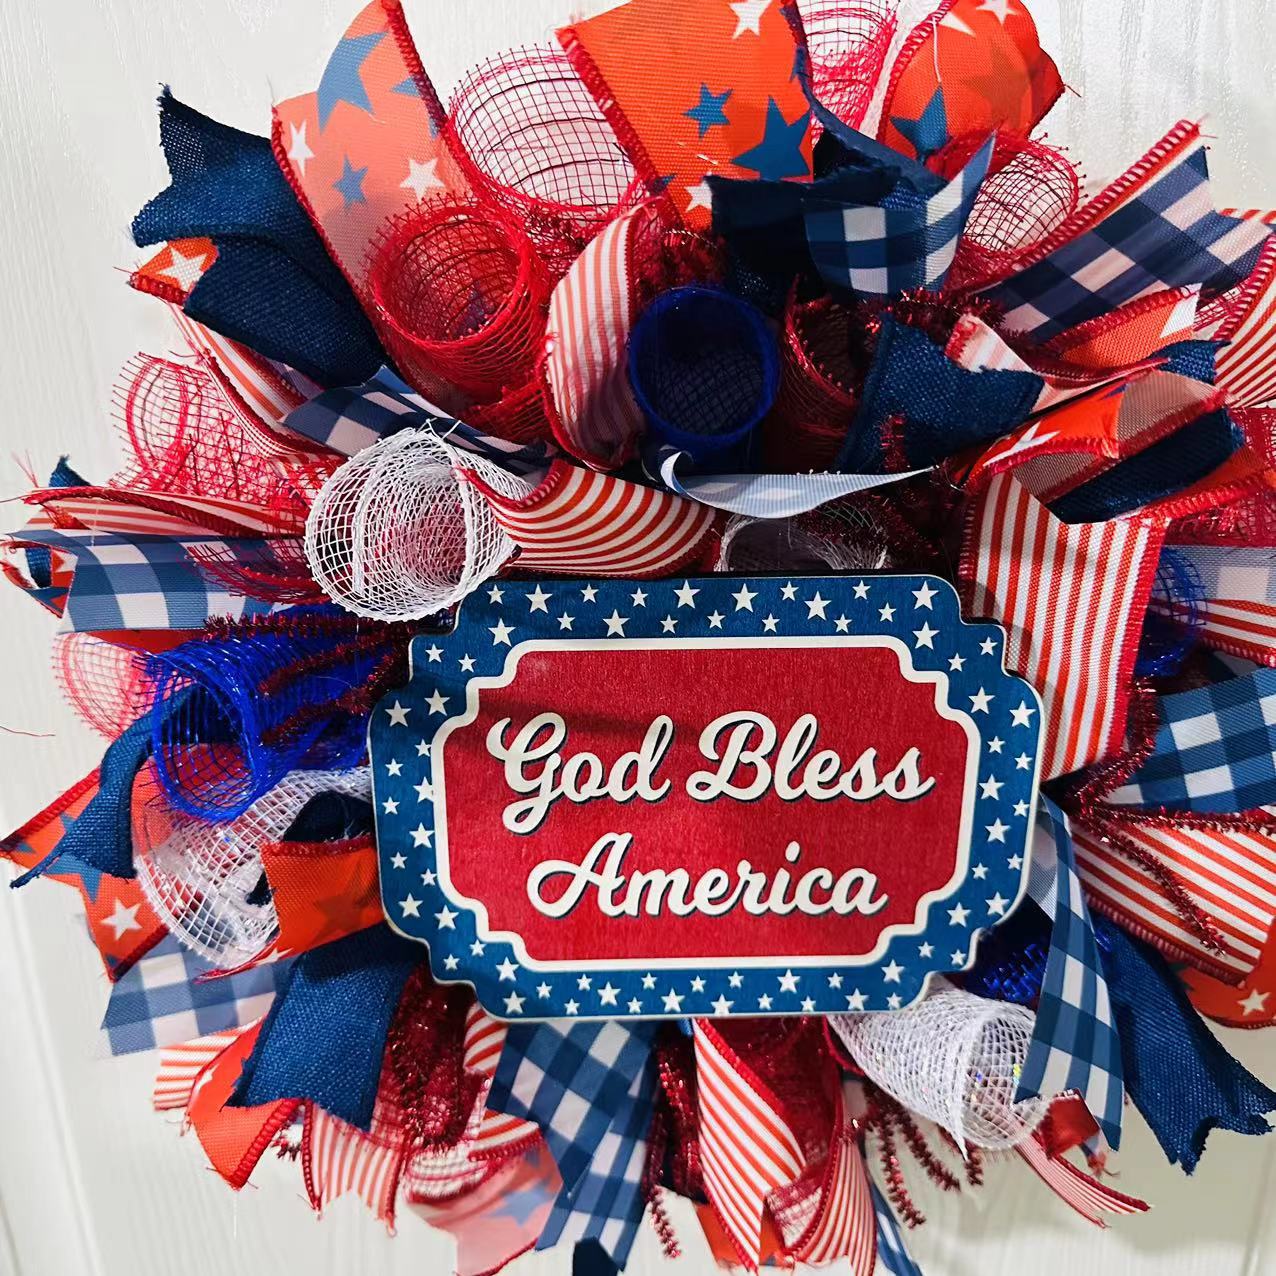 April Independence Day Wreath A Modern Minimalist, 4th of July decorations, American flag decorations, Patriotic decorations, Red, white and blue decorations, July 4th wreaths, July 4th garlands, July 4th centerpieces, 